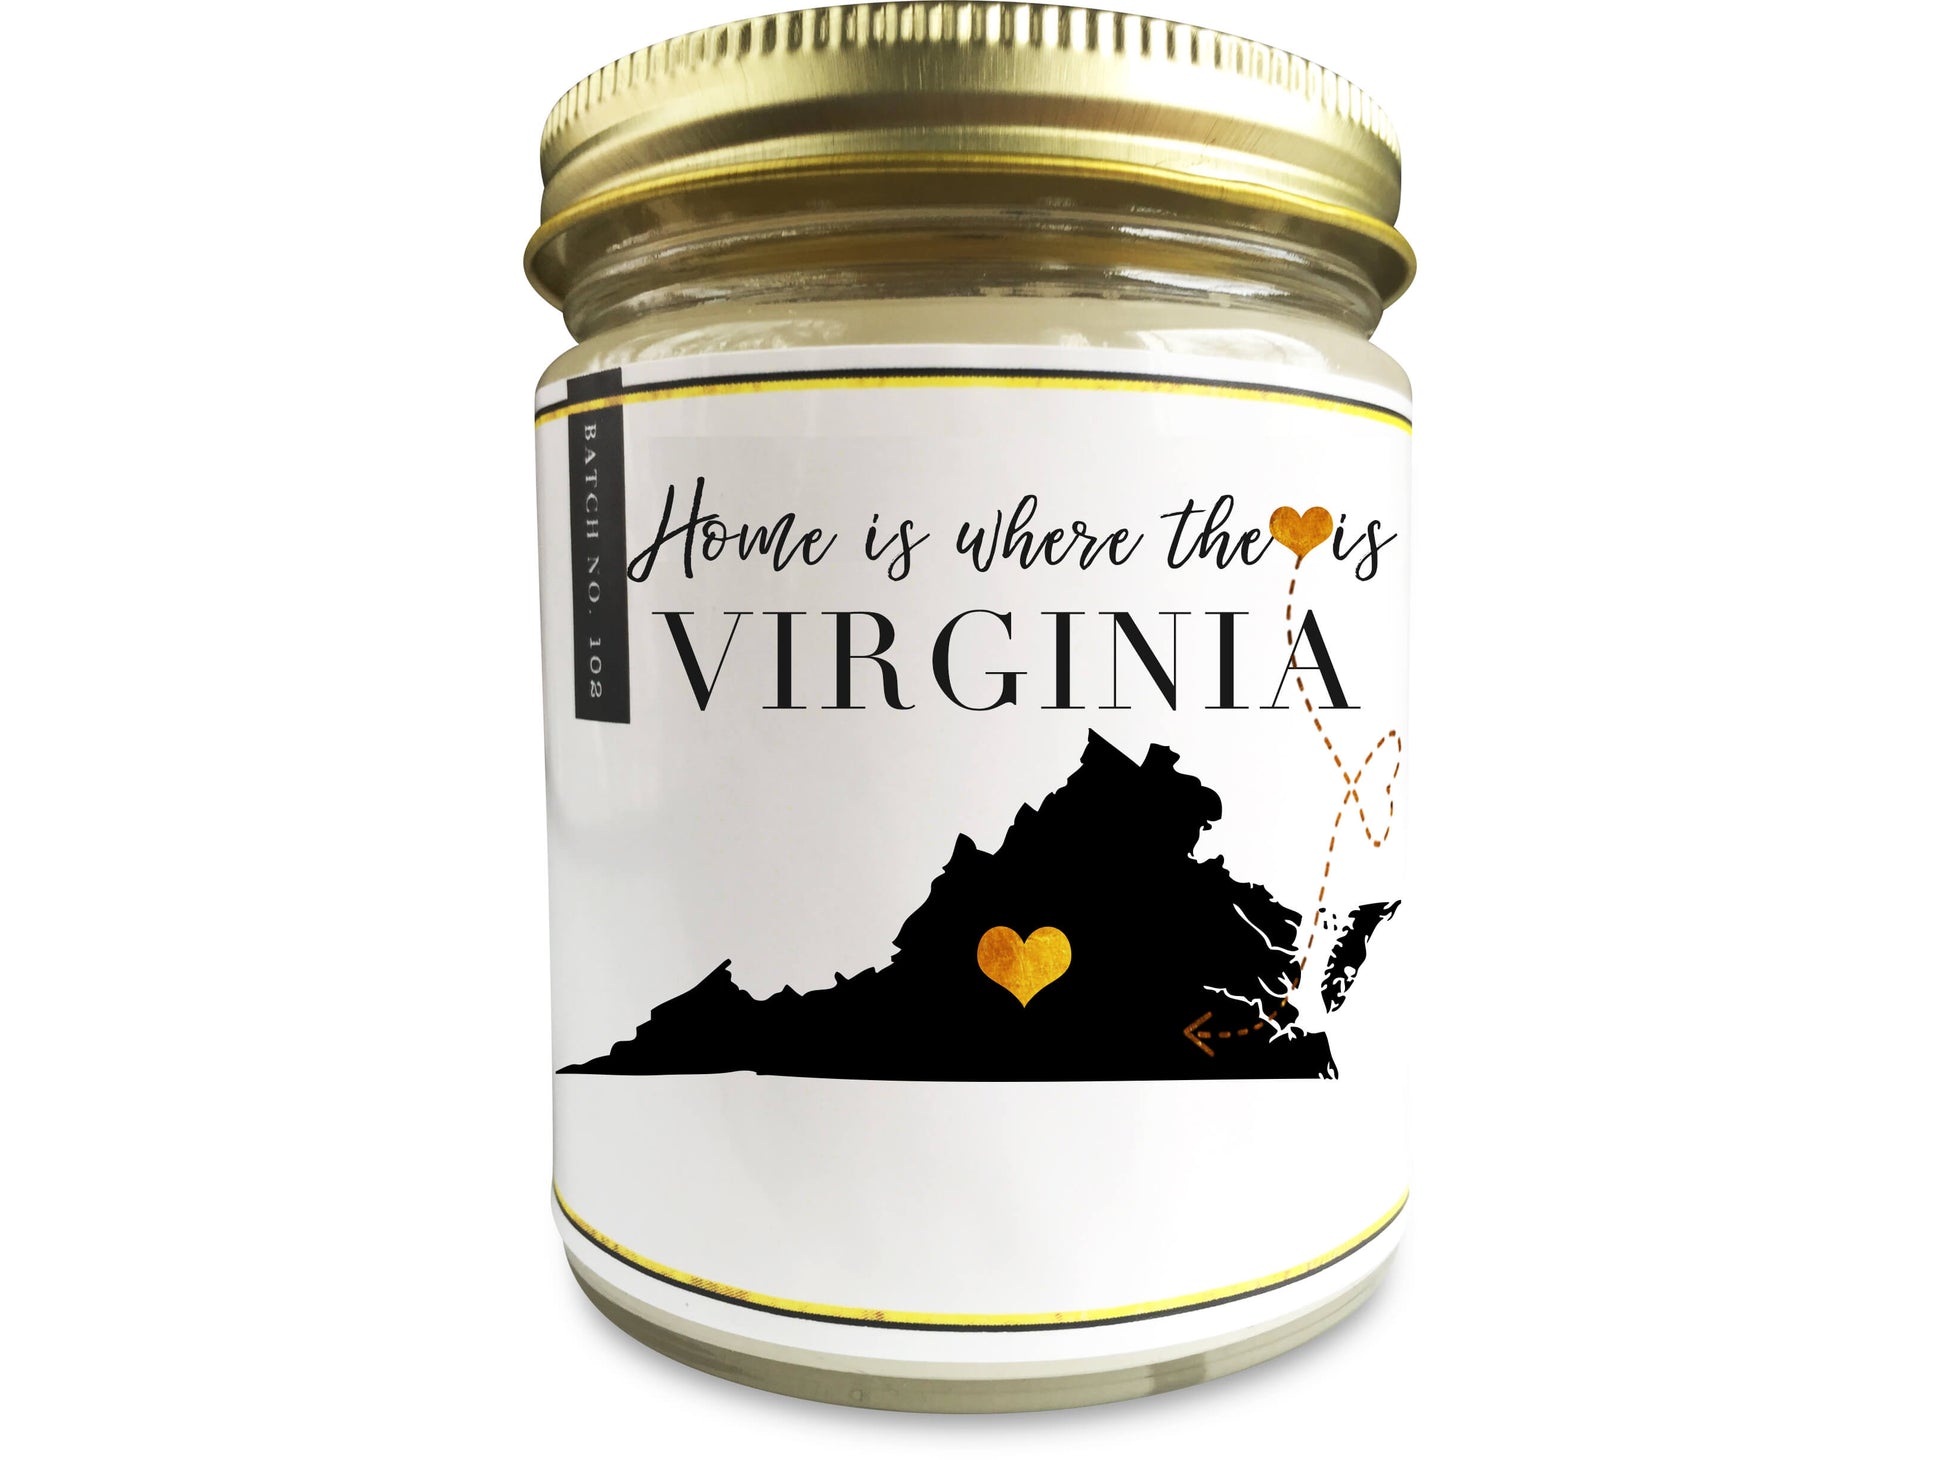 VIRGINIA Homesick Candle - PenPal Candle Co ™ - Personalize Candle Greetings